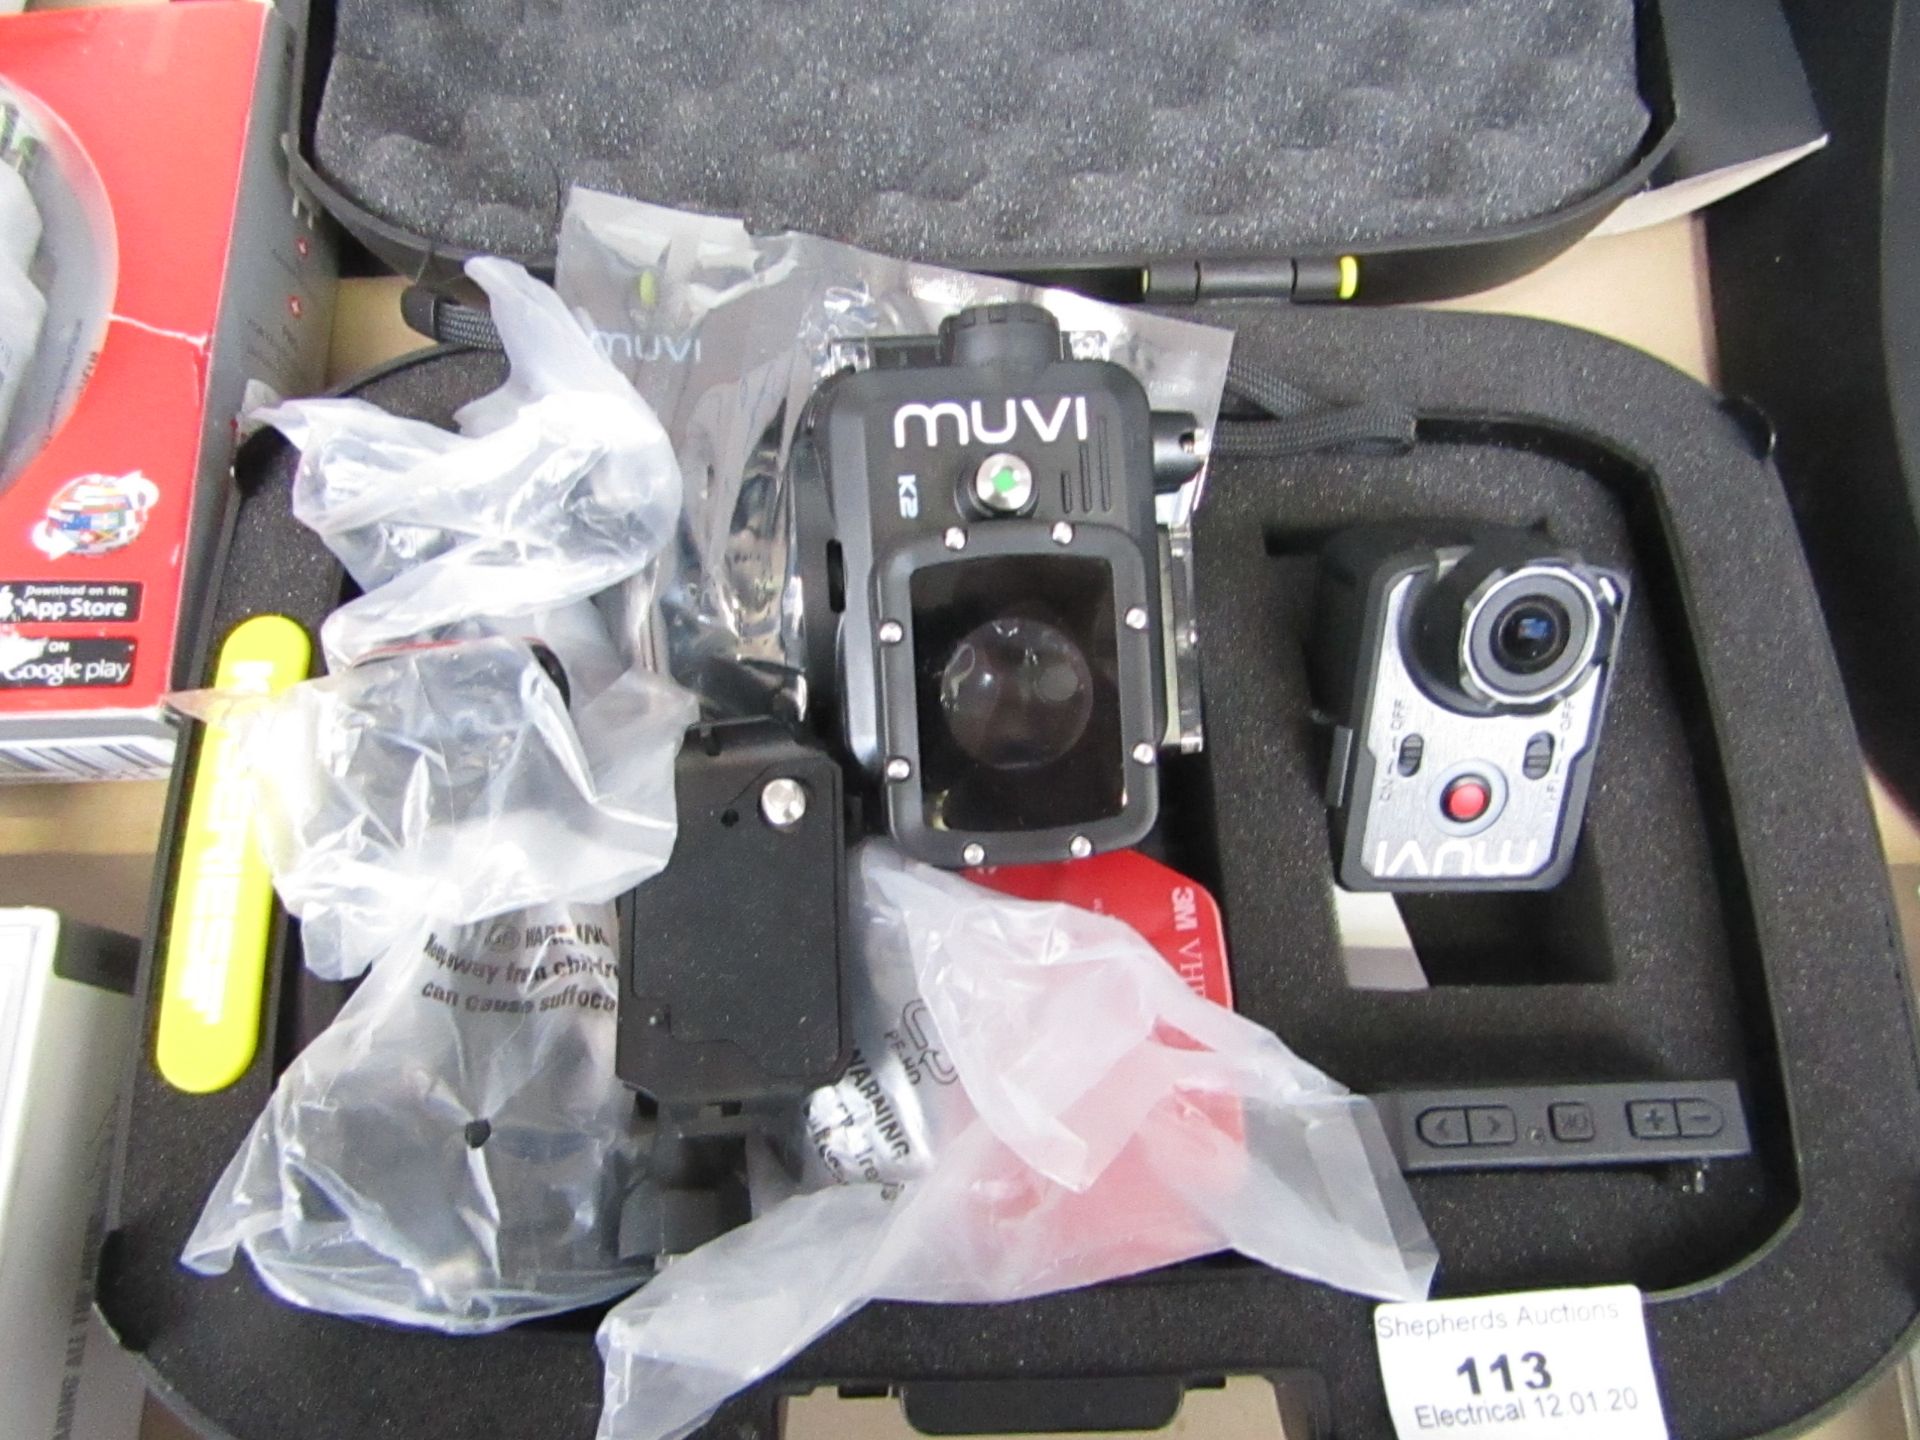 Veho - K-Series - Full HD wireless actioncam - Untested and boxed.